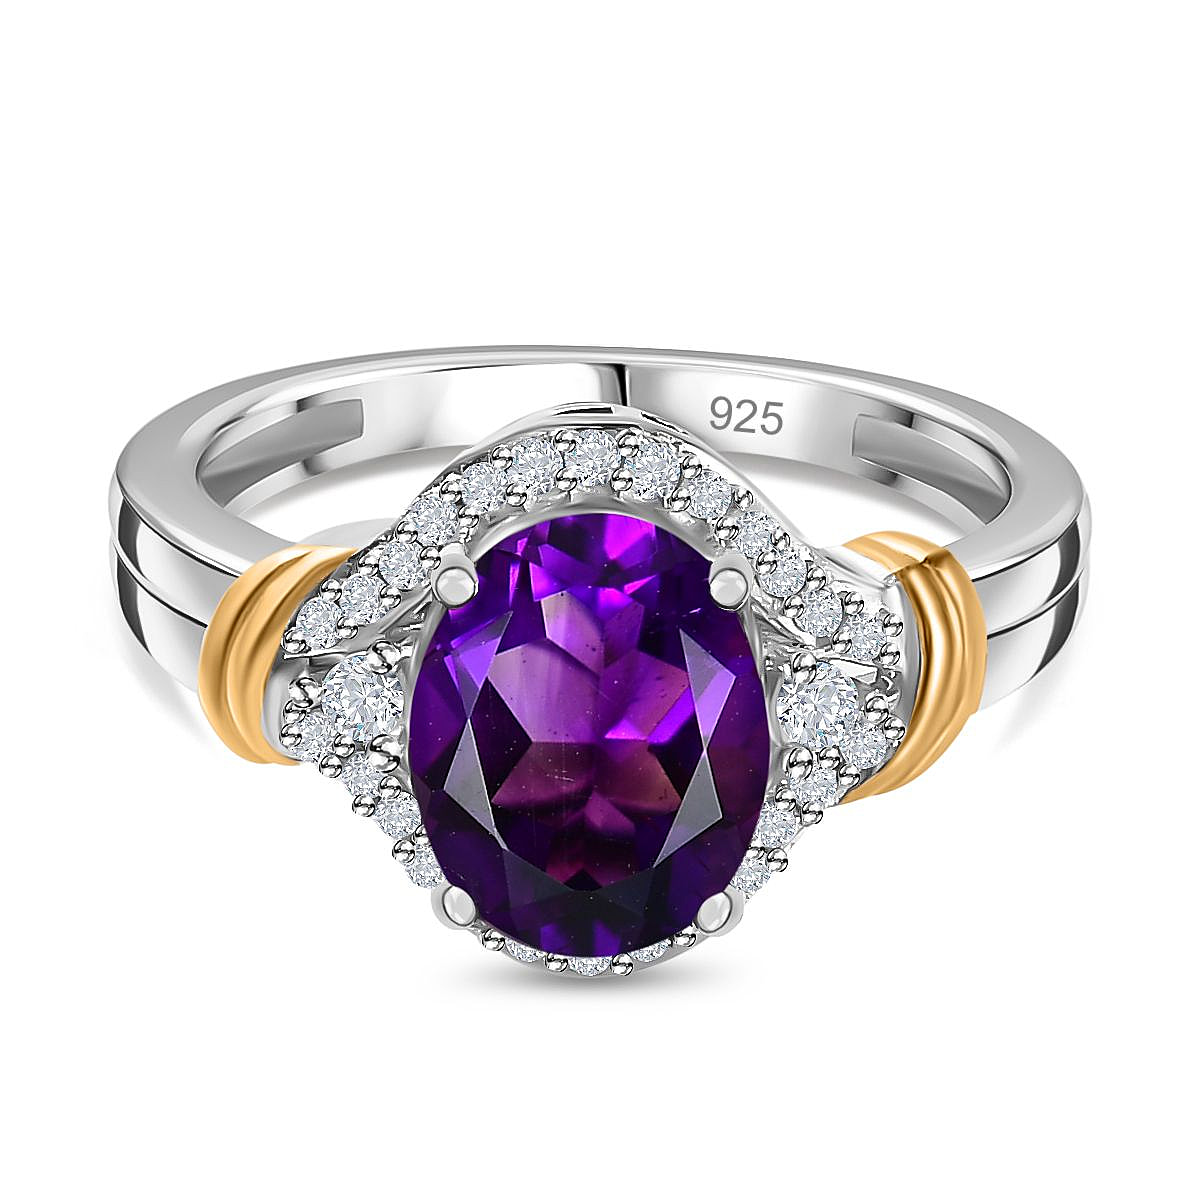 Moroccan Amethyst & Natural Zircon Ring in 18K Yellow Gold Vermeil & Platinum Plated Sterling Silver 2.11 Ct.